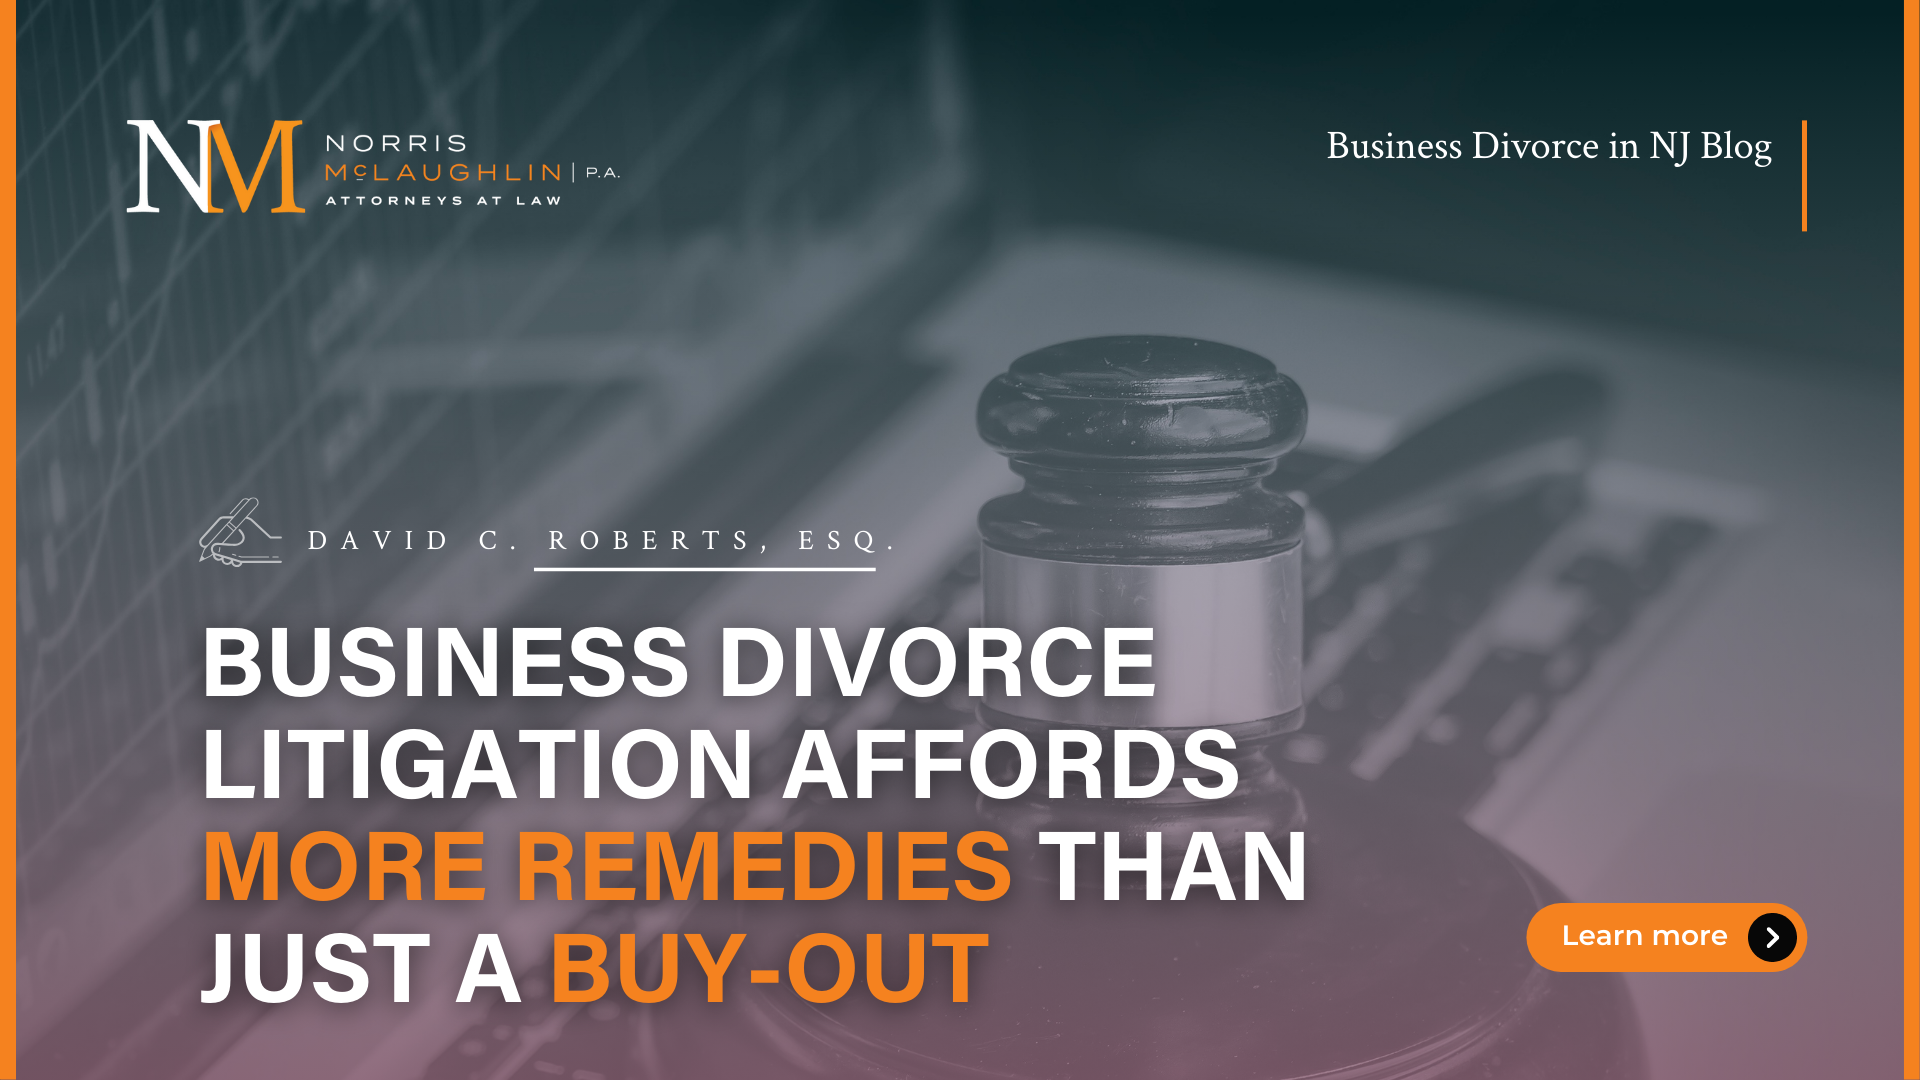 Business Divorce Litigation Affords More Remedies Than Just a Buy-Out